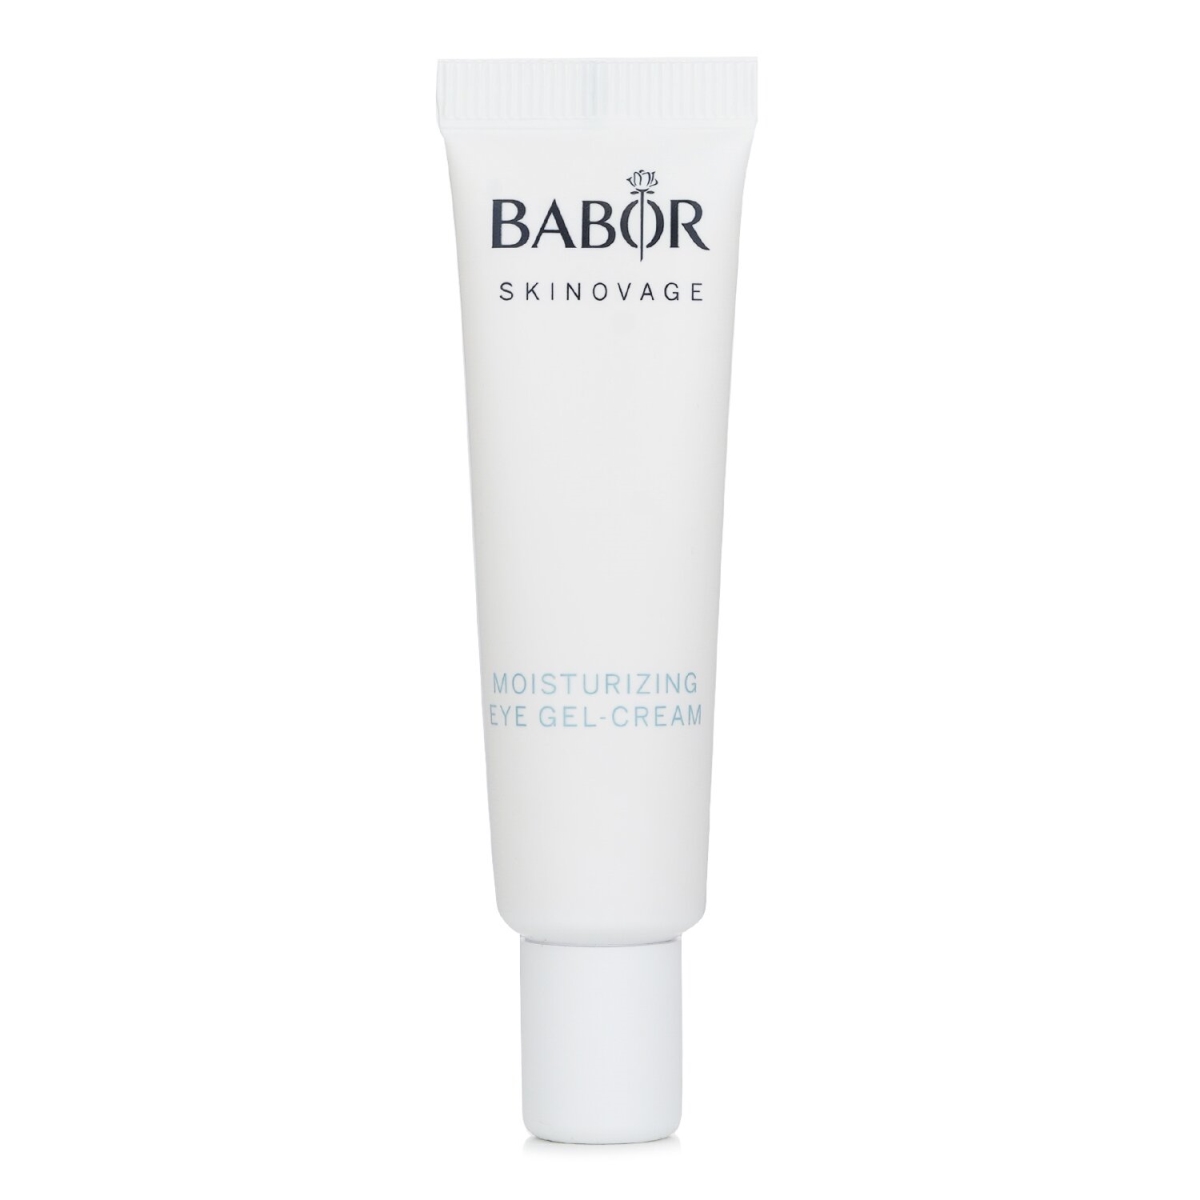 Picture of Babor 304889 15 ml Skinovage Moisturizing Eye Gel Cream for Dry & Dehydrated Skin